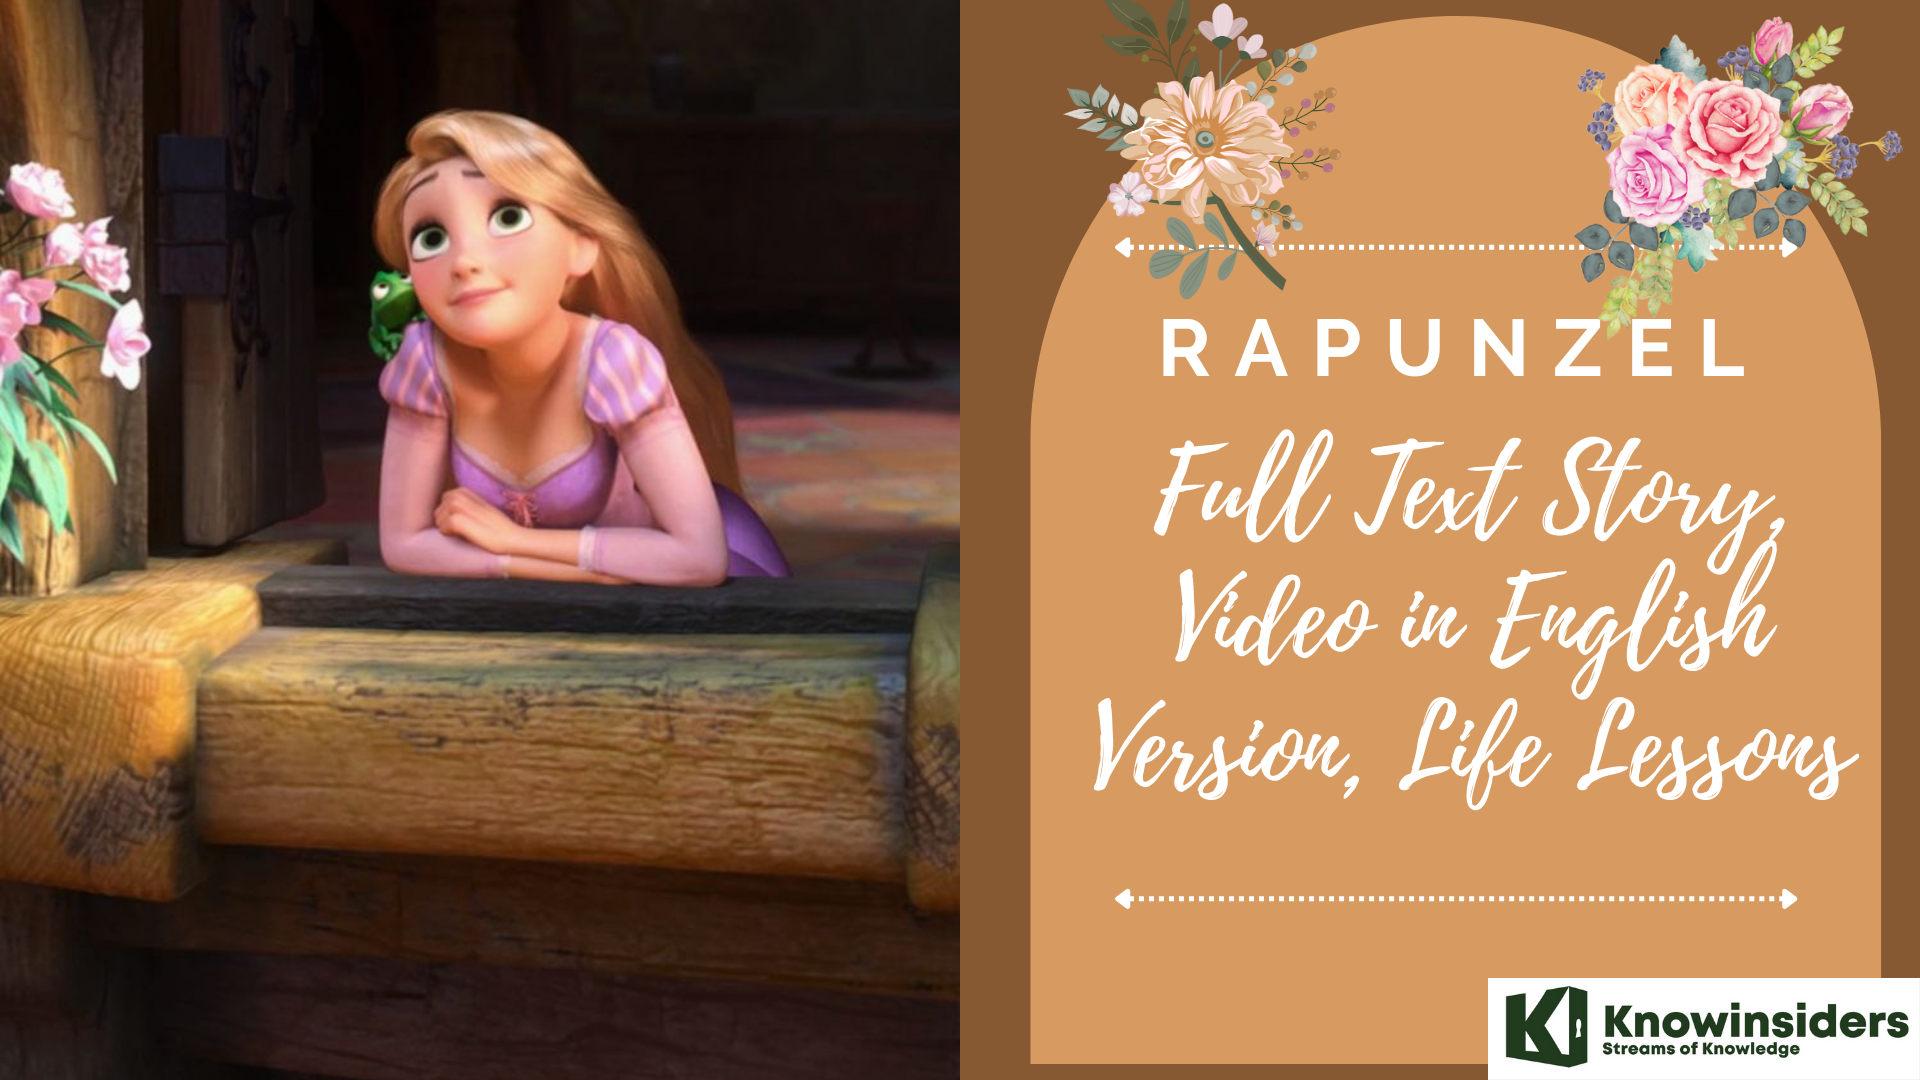 Rapunzel FairyTale: Full Text Story, Video in English Version, Life Lessons